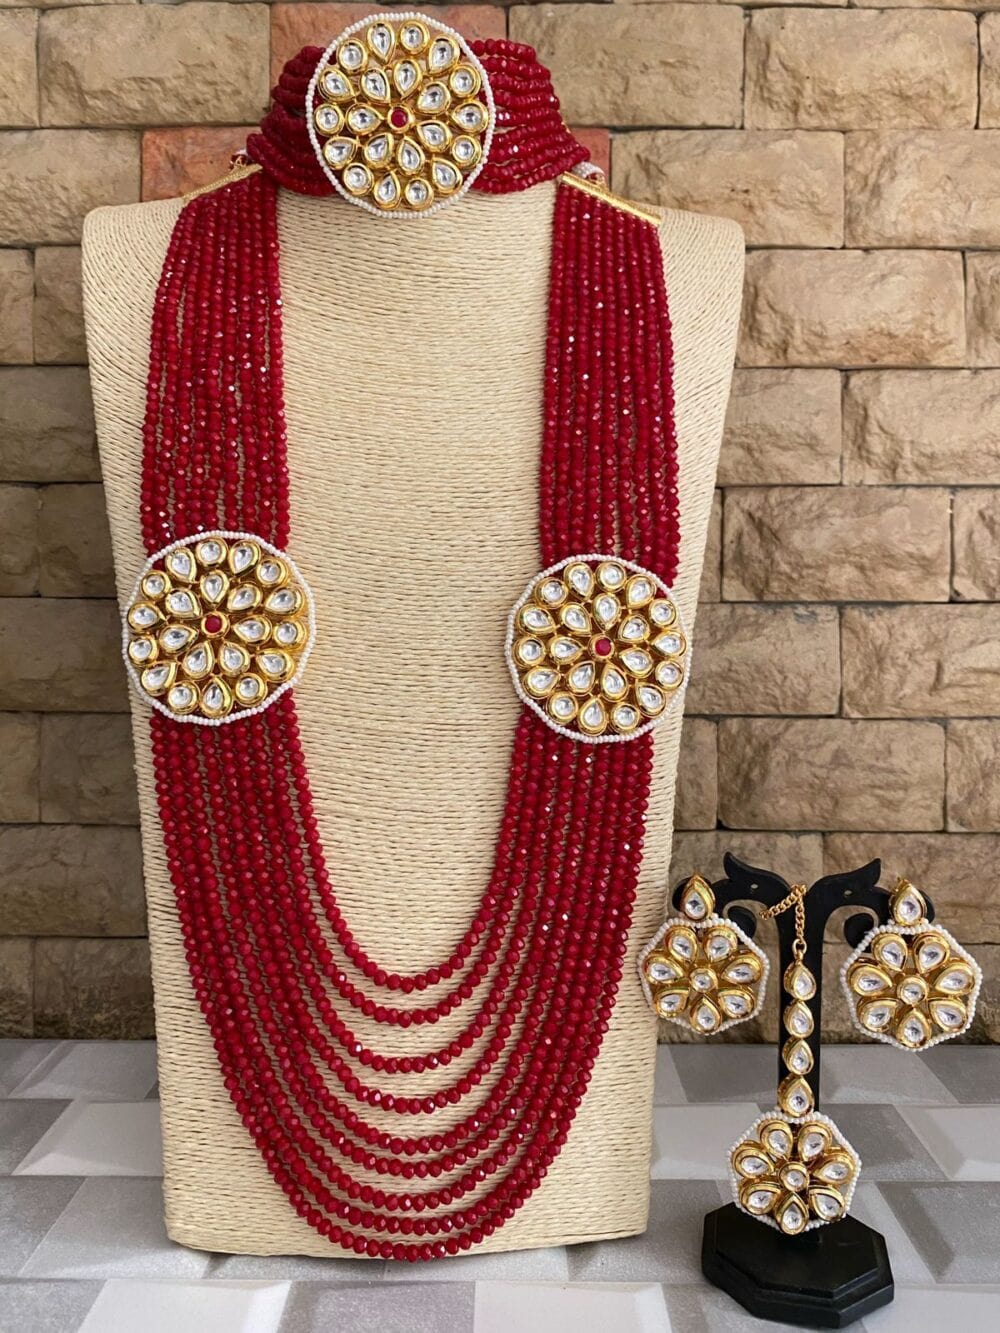 Multilayered Crystal Beads Choker And Long Necklace Set By Gehna Shop Bridal Necklace Sets